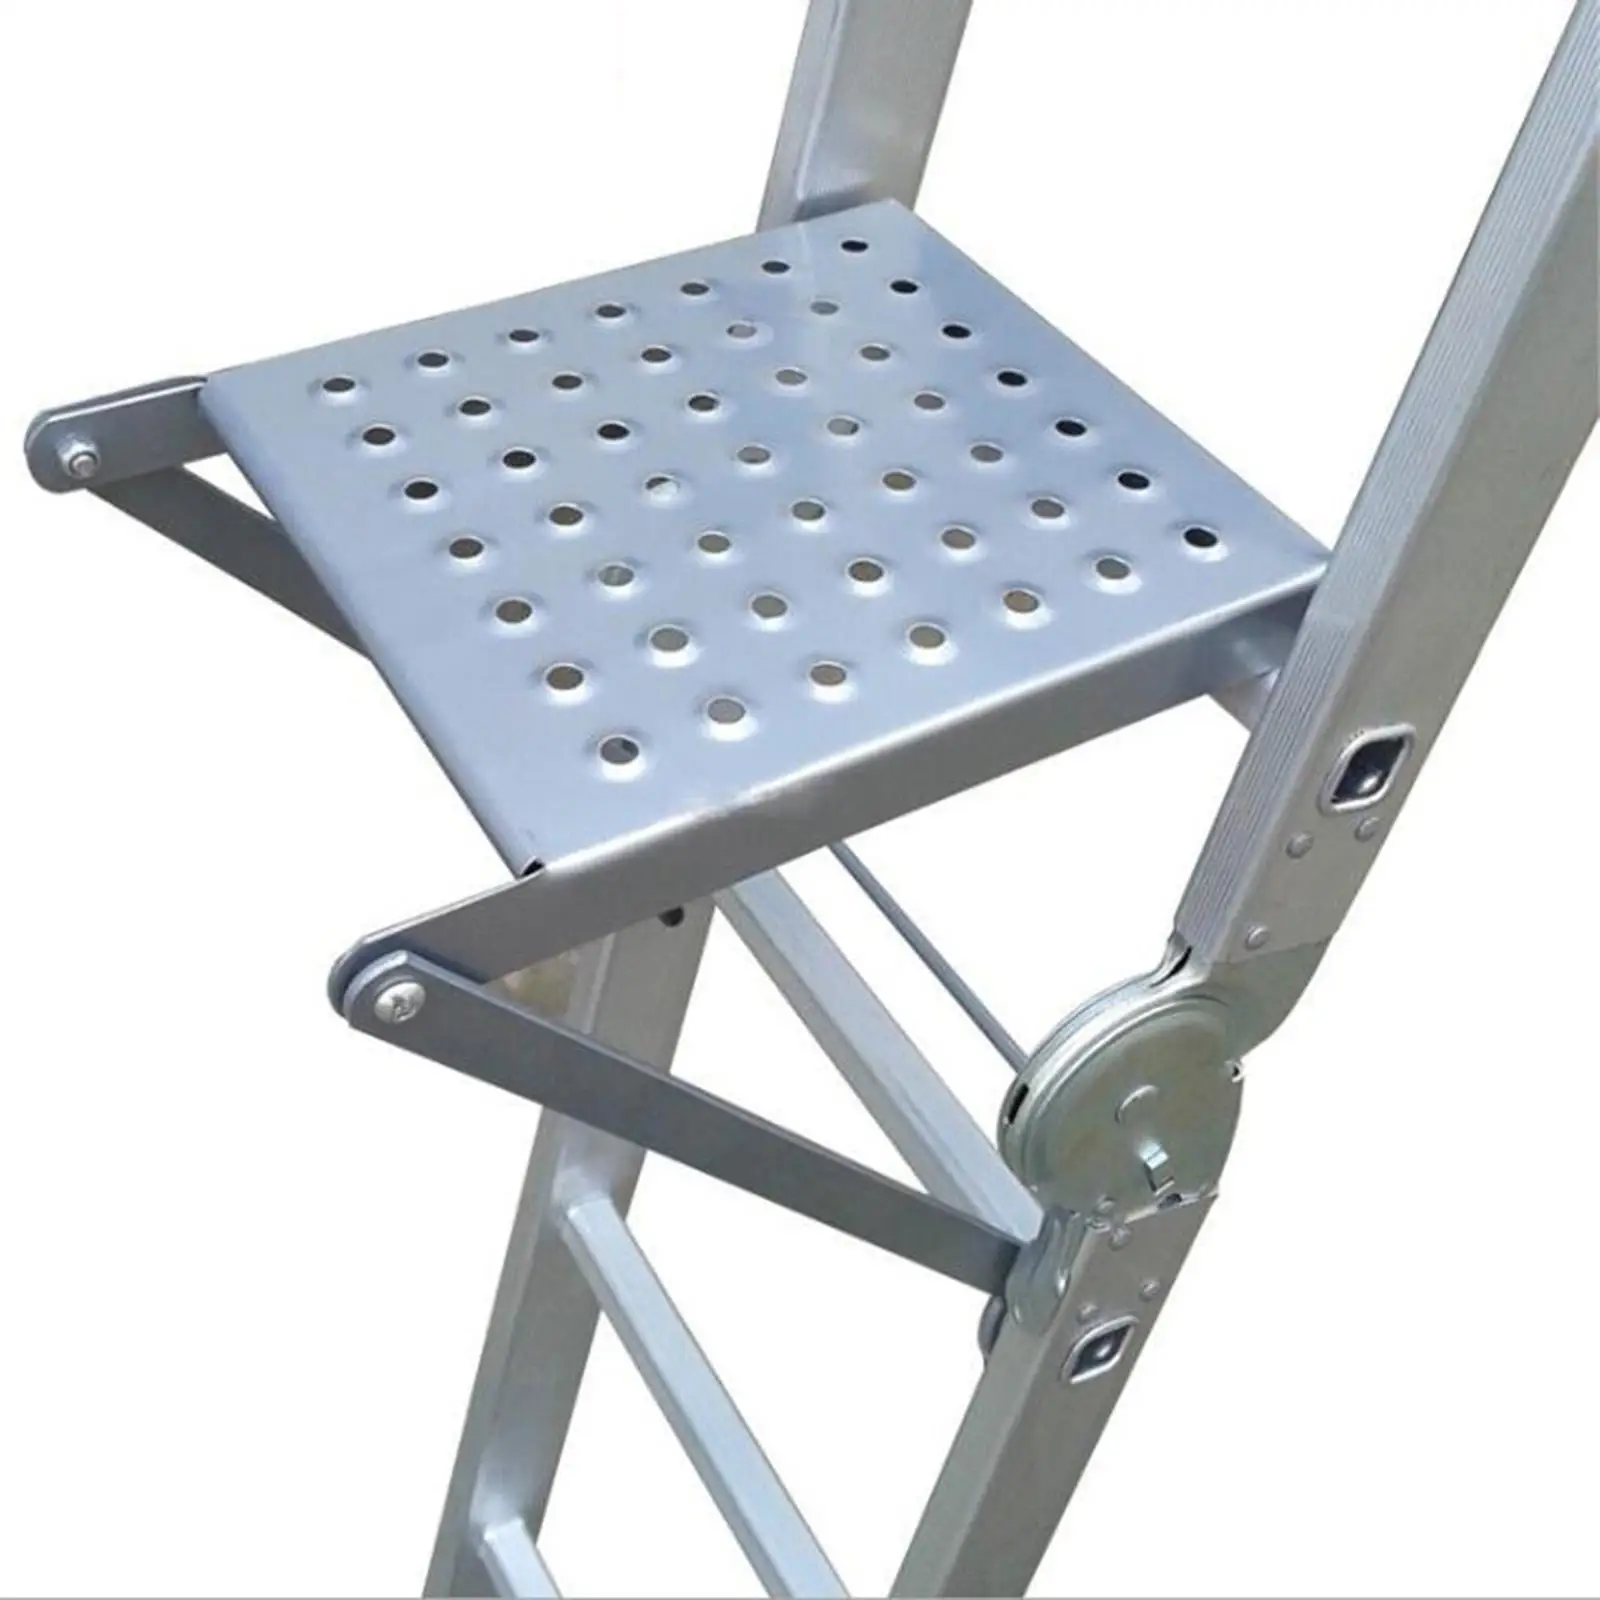 Ladder Work Platform Portable Ladder Work Stand Heavy Duty Stable Multipurpose for Working Household Pantry Kitchen Tools Hold